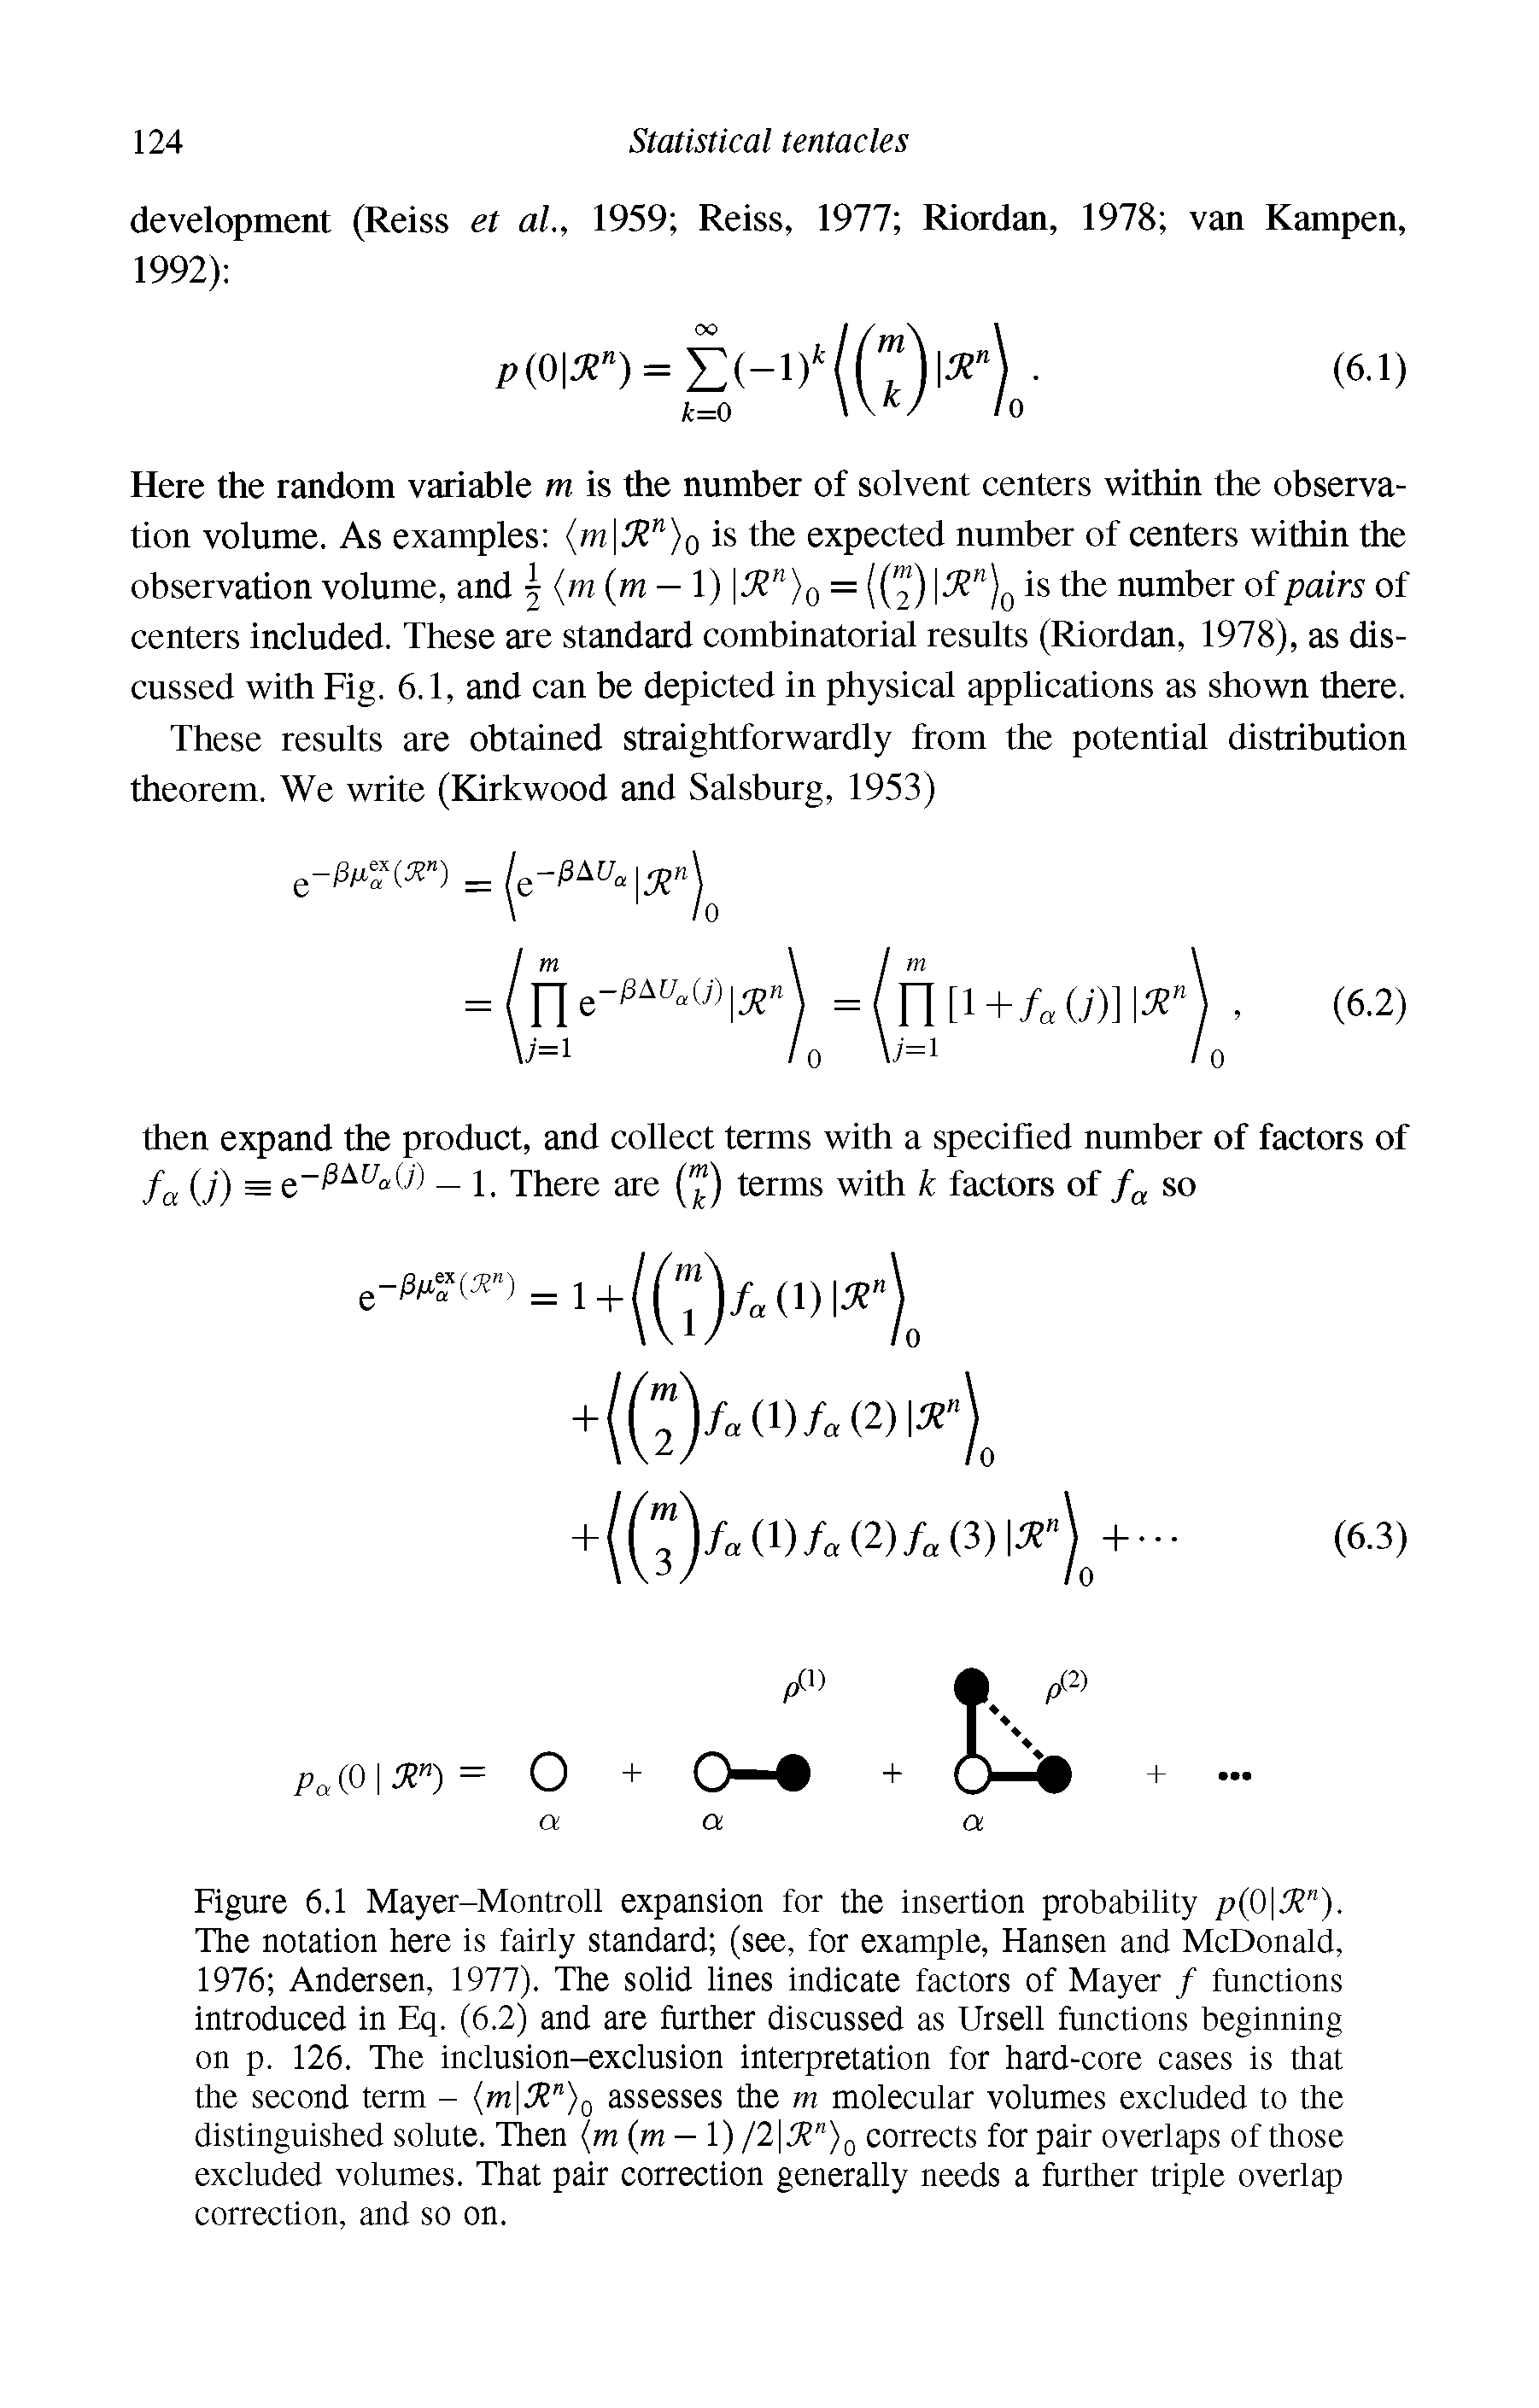 Figure 6.1 Mayer-Montroll expansion for the insertion probability p(0 X"). The notation here is fairly standard (see, for example, Hansen and McDonald, 1976 Andersen, 1977). The solid lines indicate factors of Mayer / functions introduced in Eq. (6.2) and are further discussed as Ursell functions beginning on p. 126. The inclusion-exclusion interpretation for hard-core cases is that the second term - assesses the m molecular volumes excluded to the...